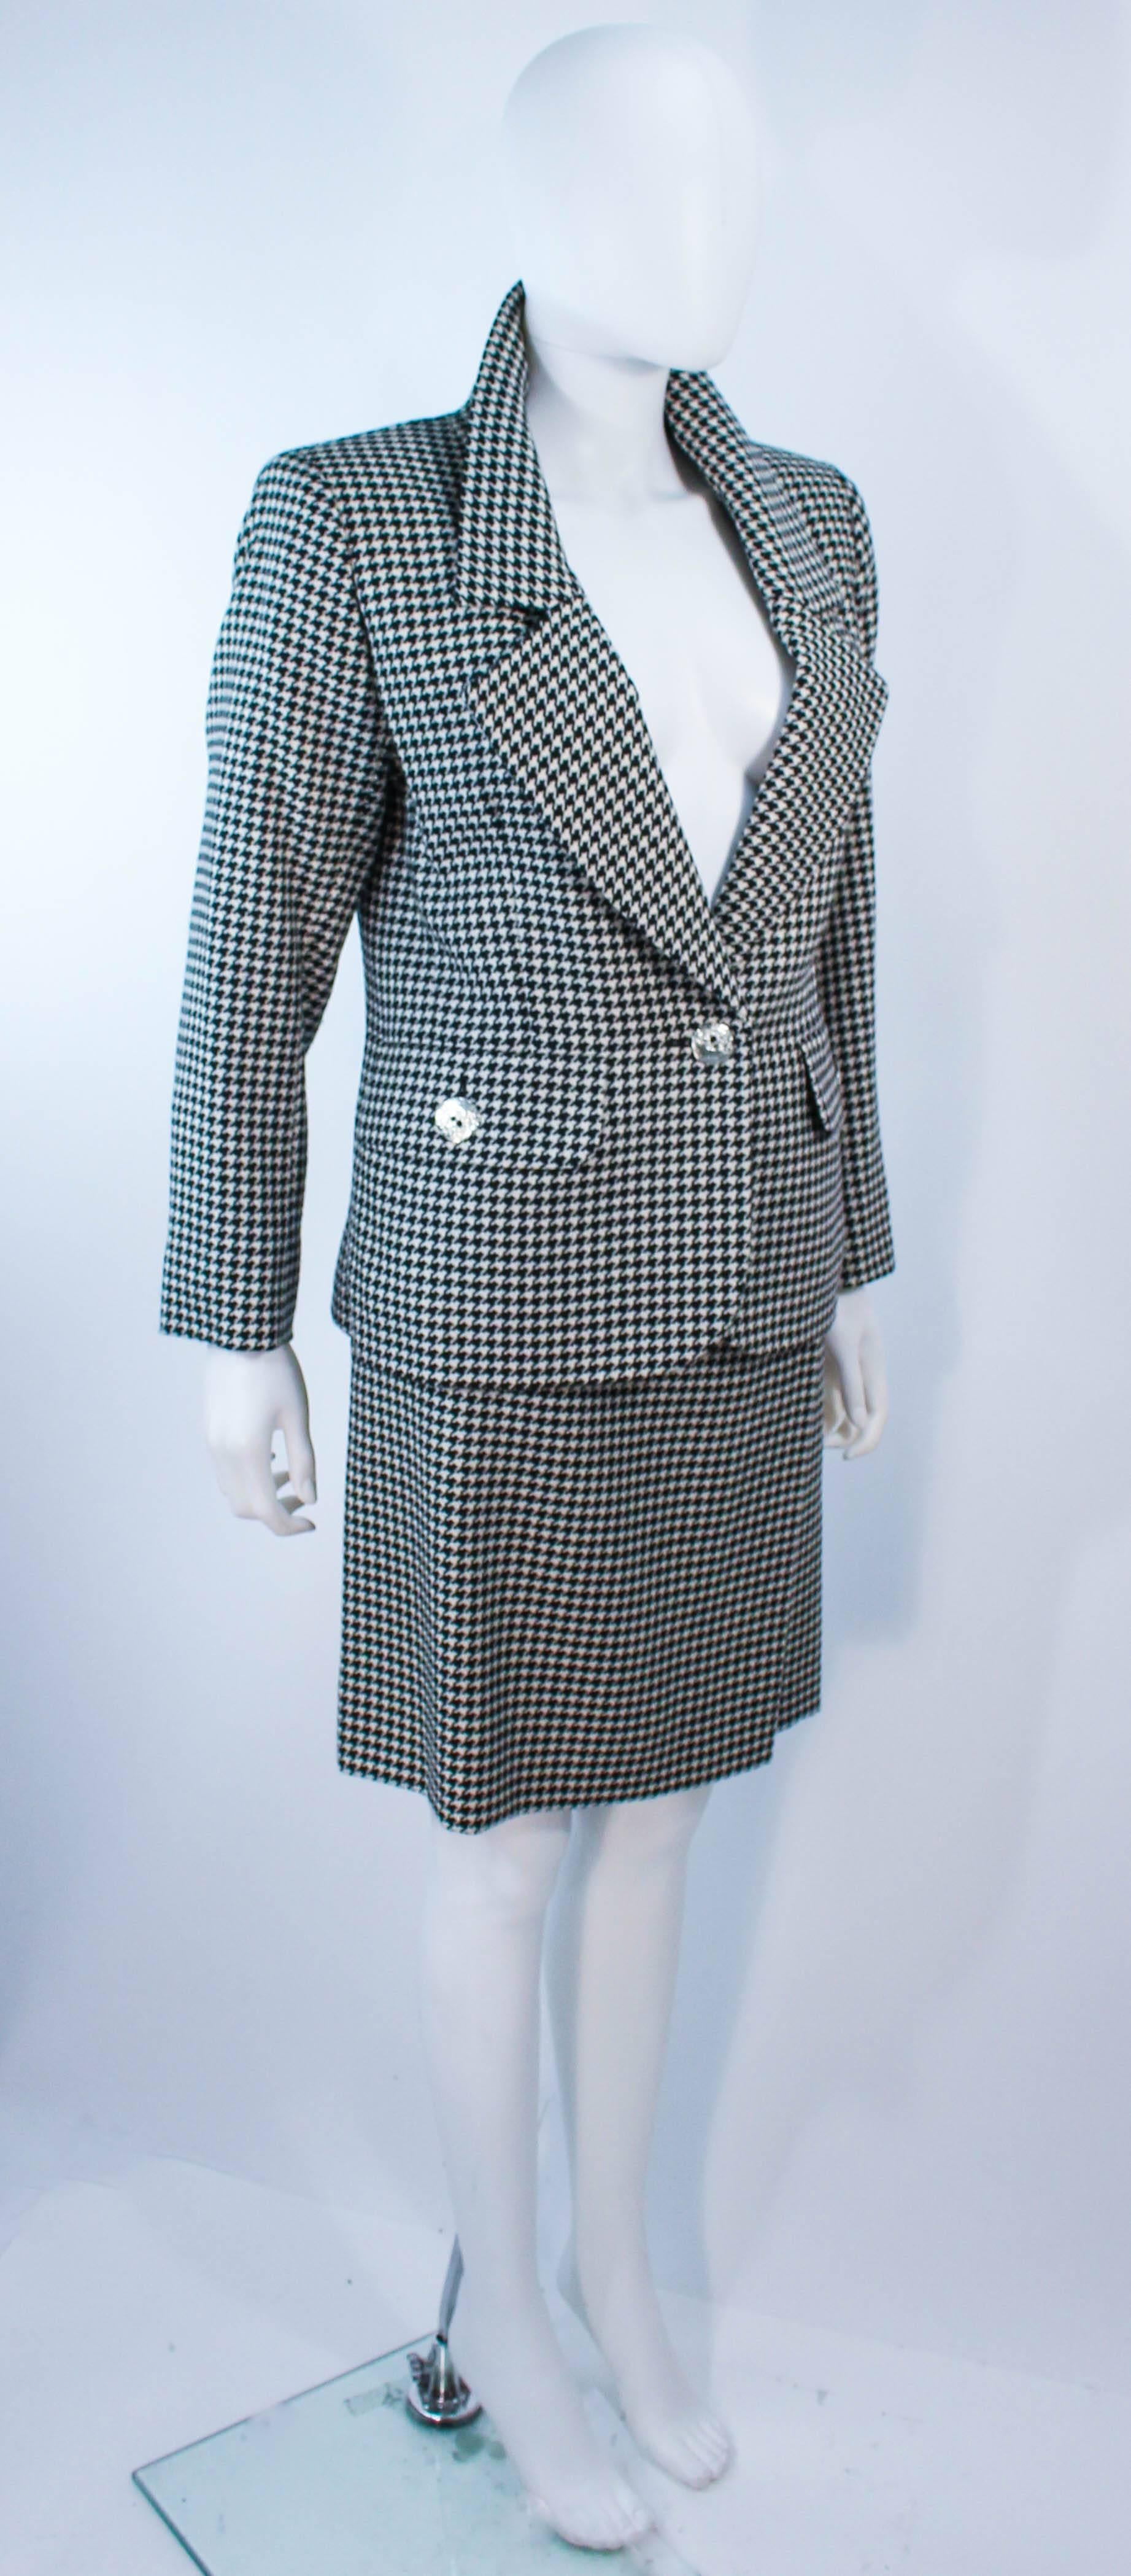 YVES SAINT LAURENT Black and White Houndstooth Skirt Suit Size 8 10 In Excellent Condition For Sale In Los Angeles, CA